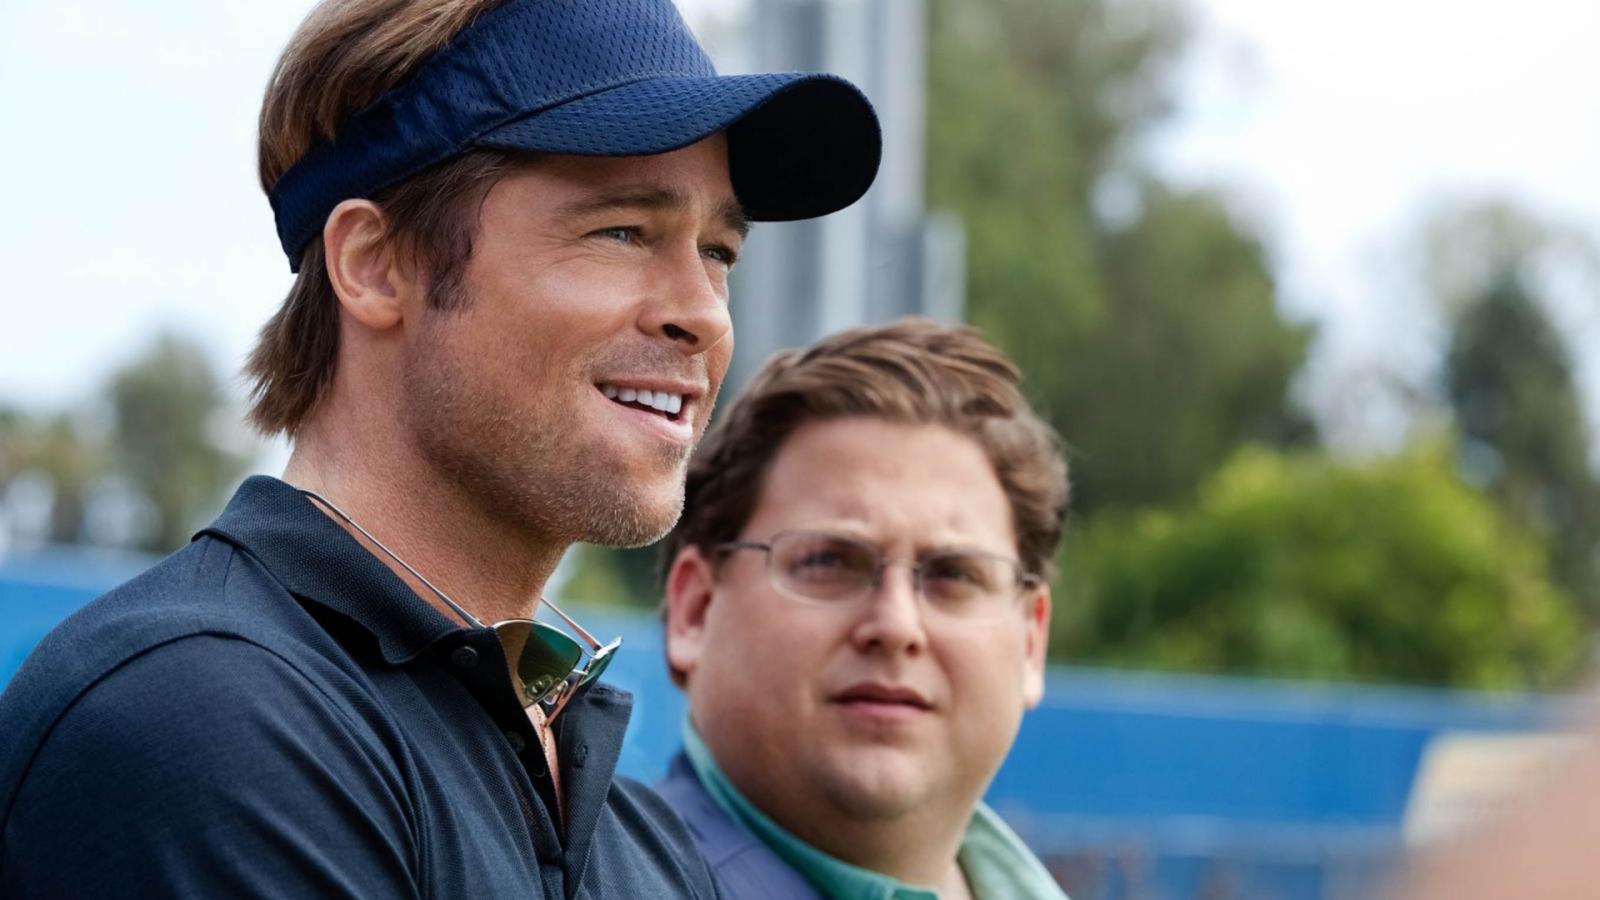 10 Sports Movies That Scored Big on and Off the Field - image 4